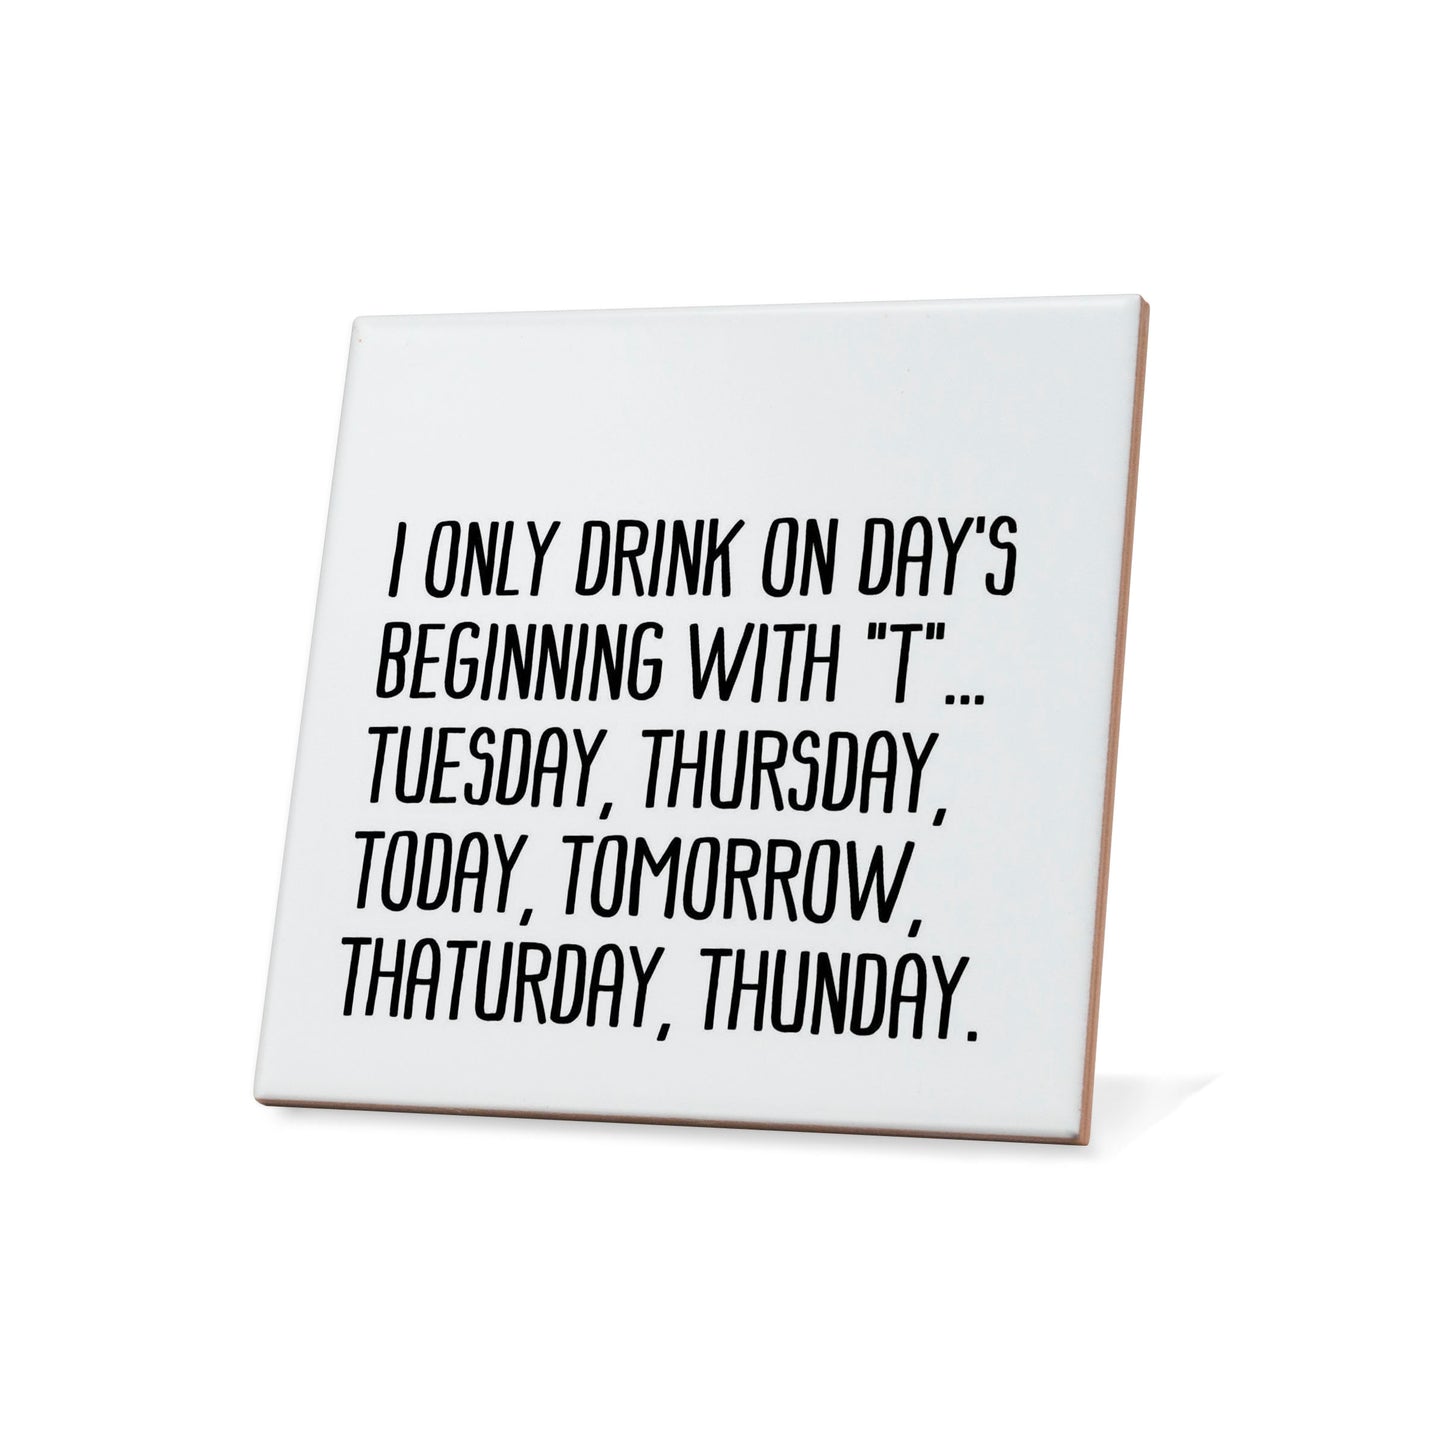 I only drink on day's beginning with "T" ... Quote Coaster